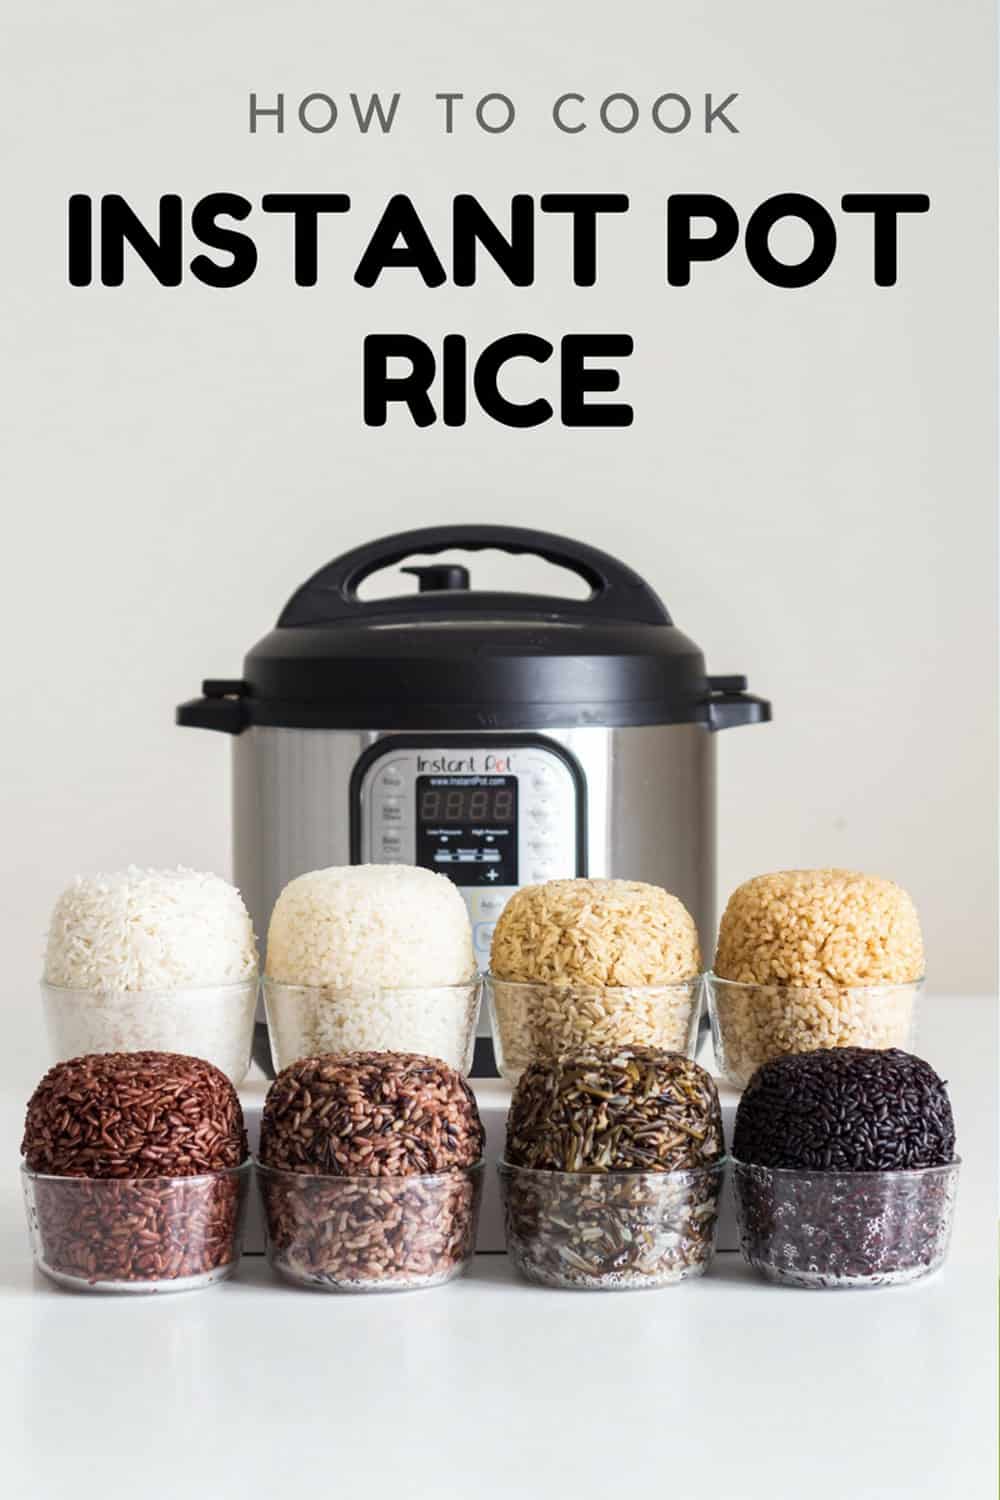 https://greenhealthycooking.com/wp-content/uploads/2018/02/How-To-Cook-Instant-Pot-Rice.jpg